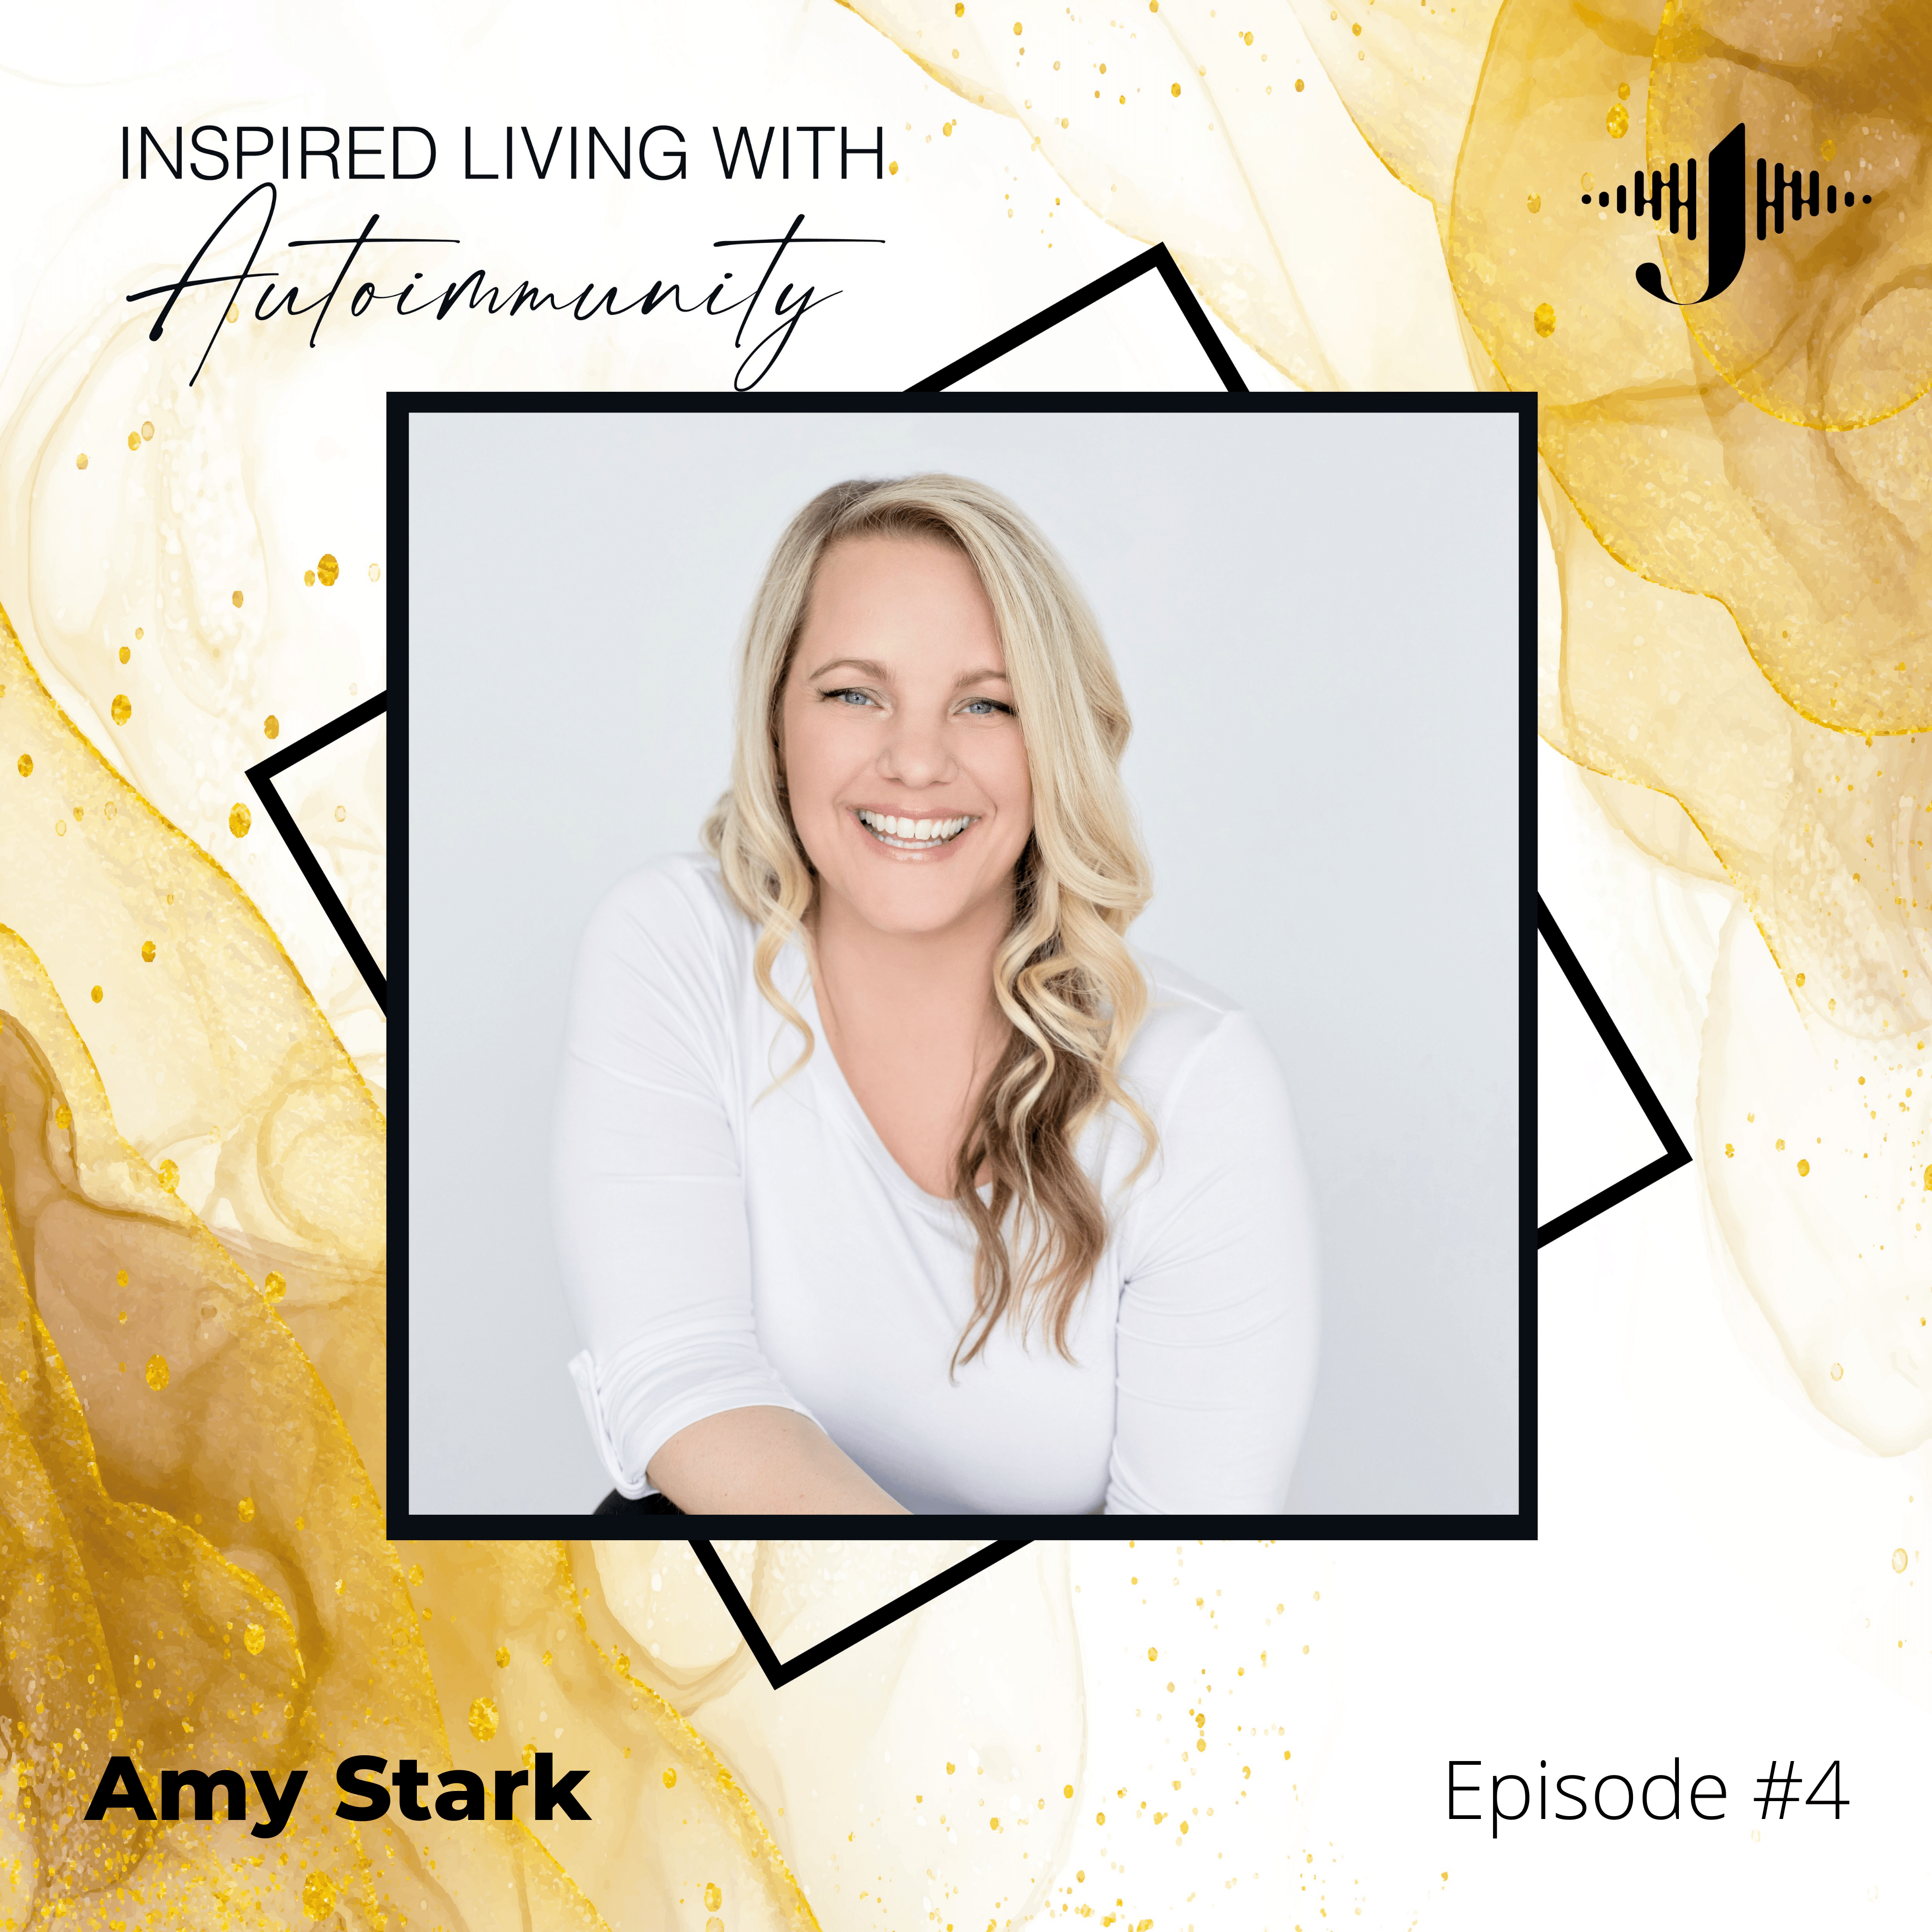 Amy Stark: Creating the Life You Want